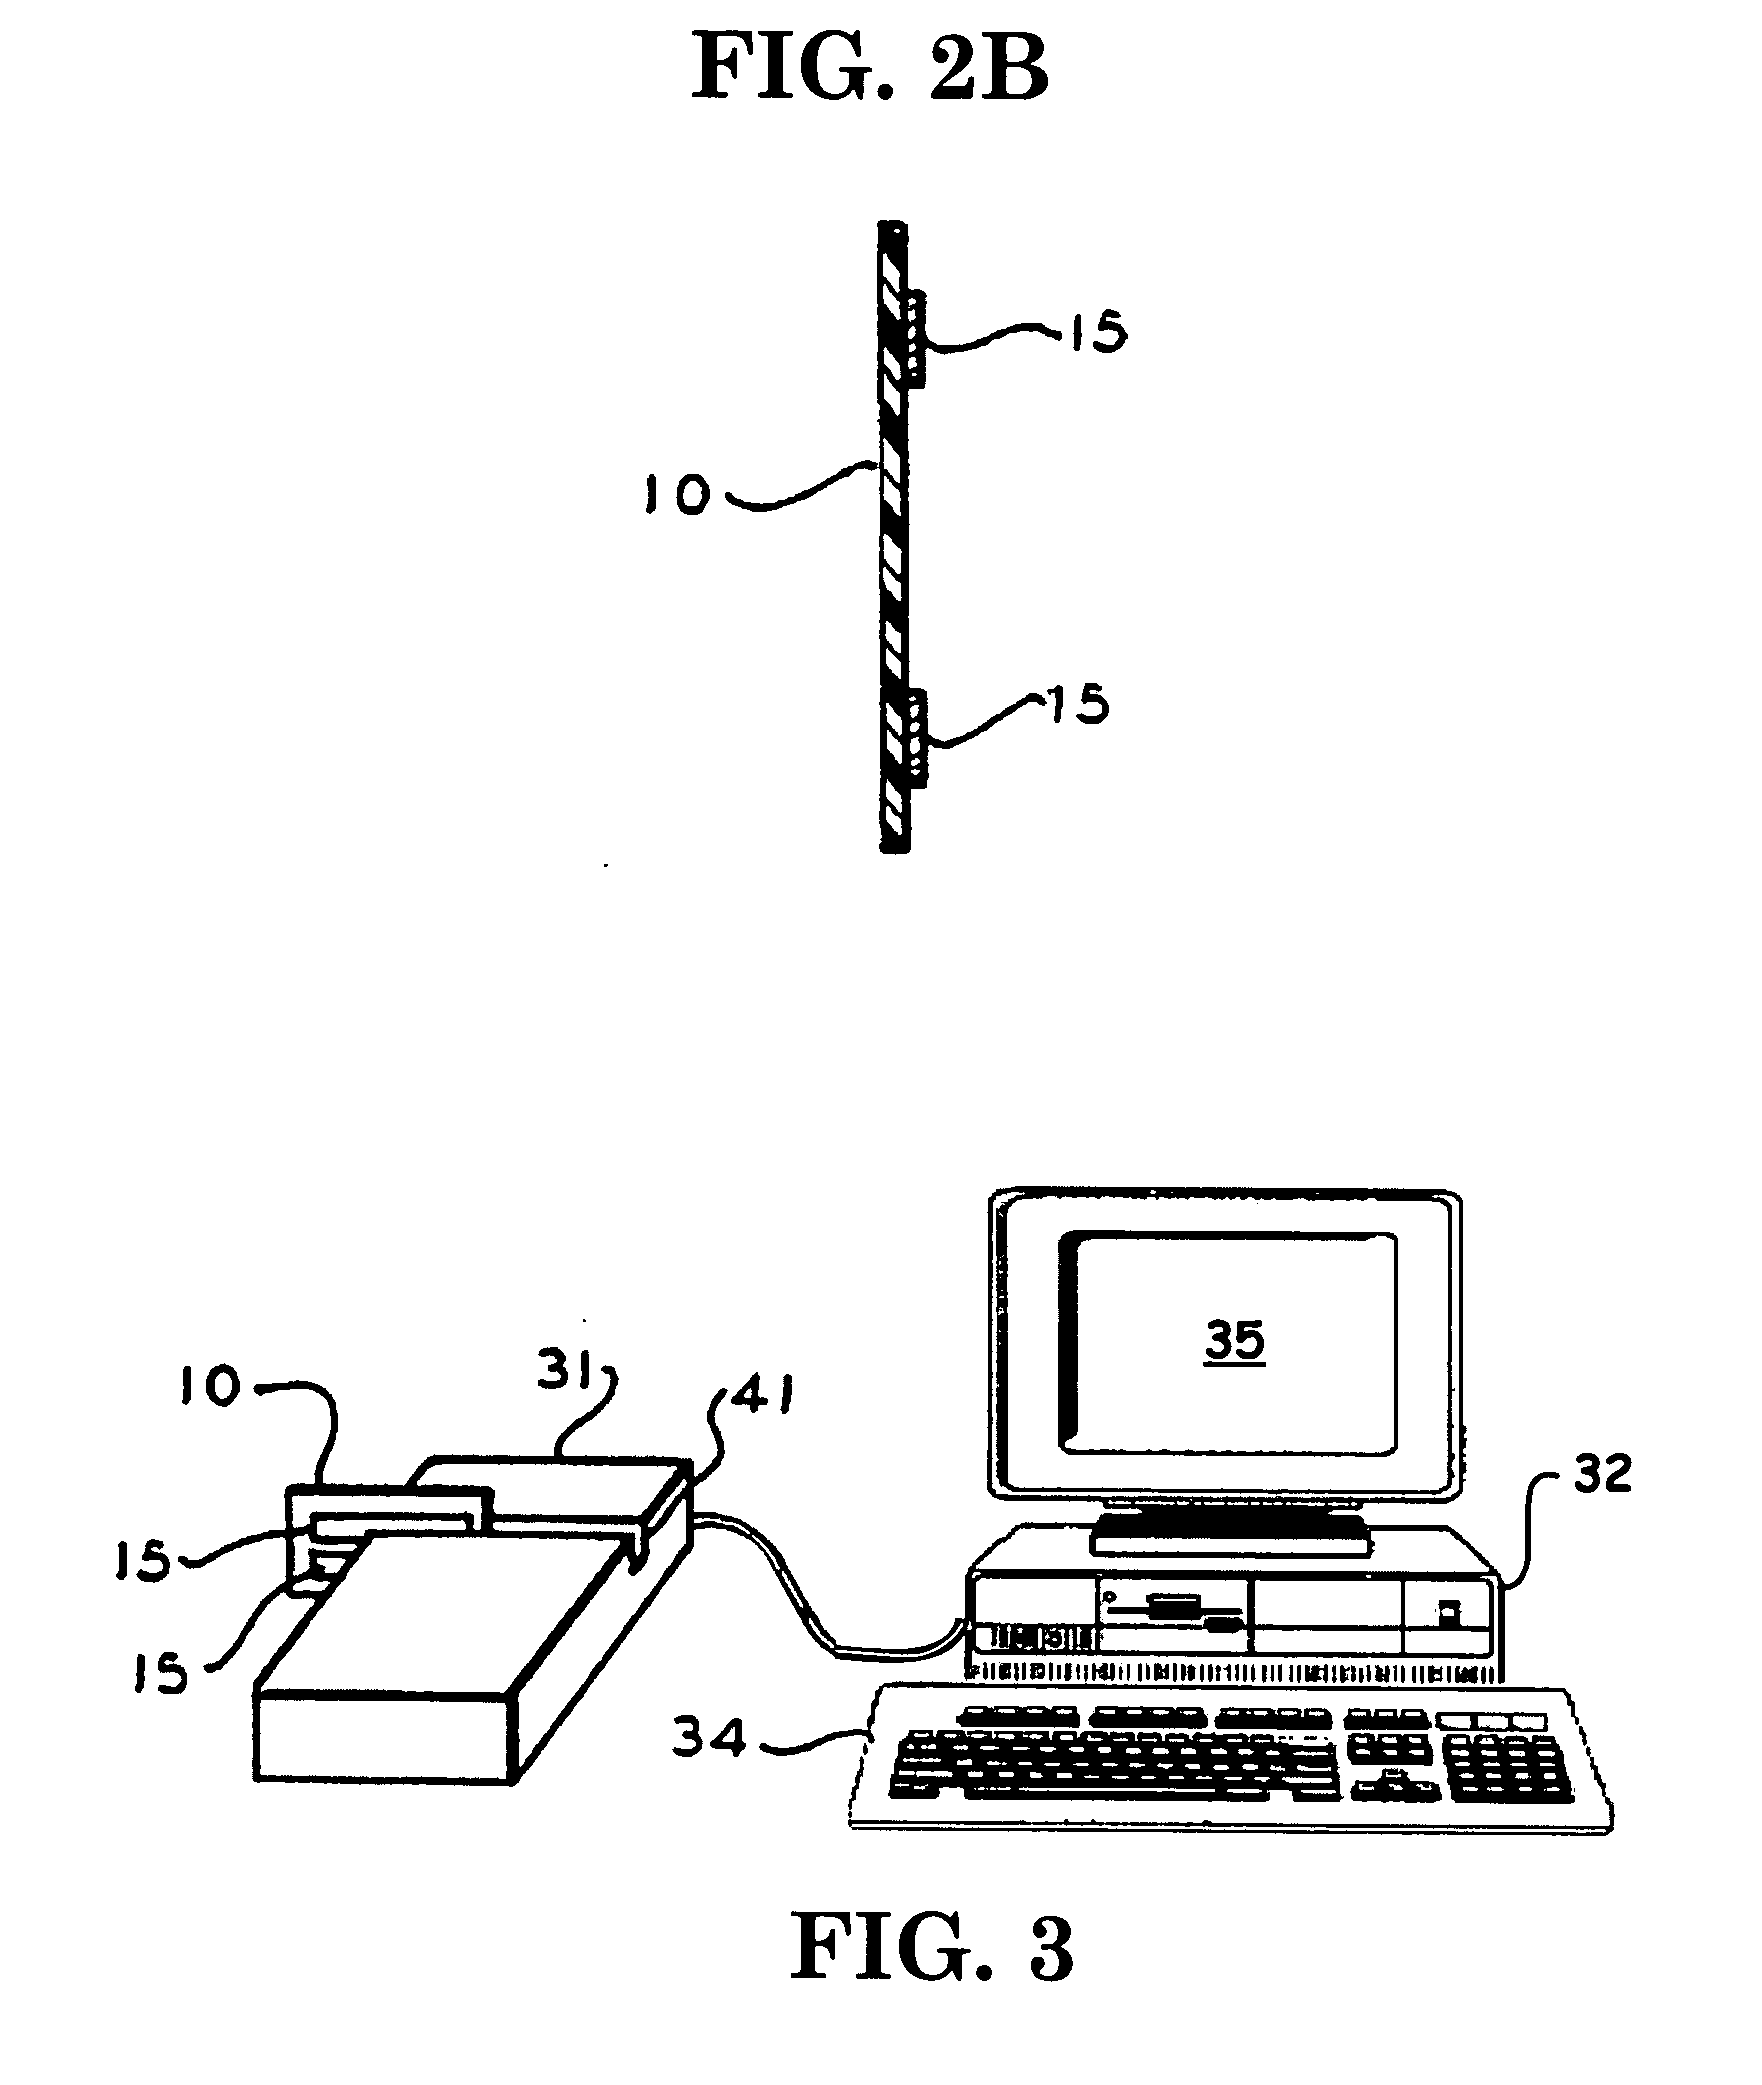 Method and system for storing, retrieving and updating information from an information card